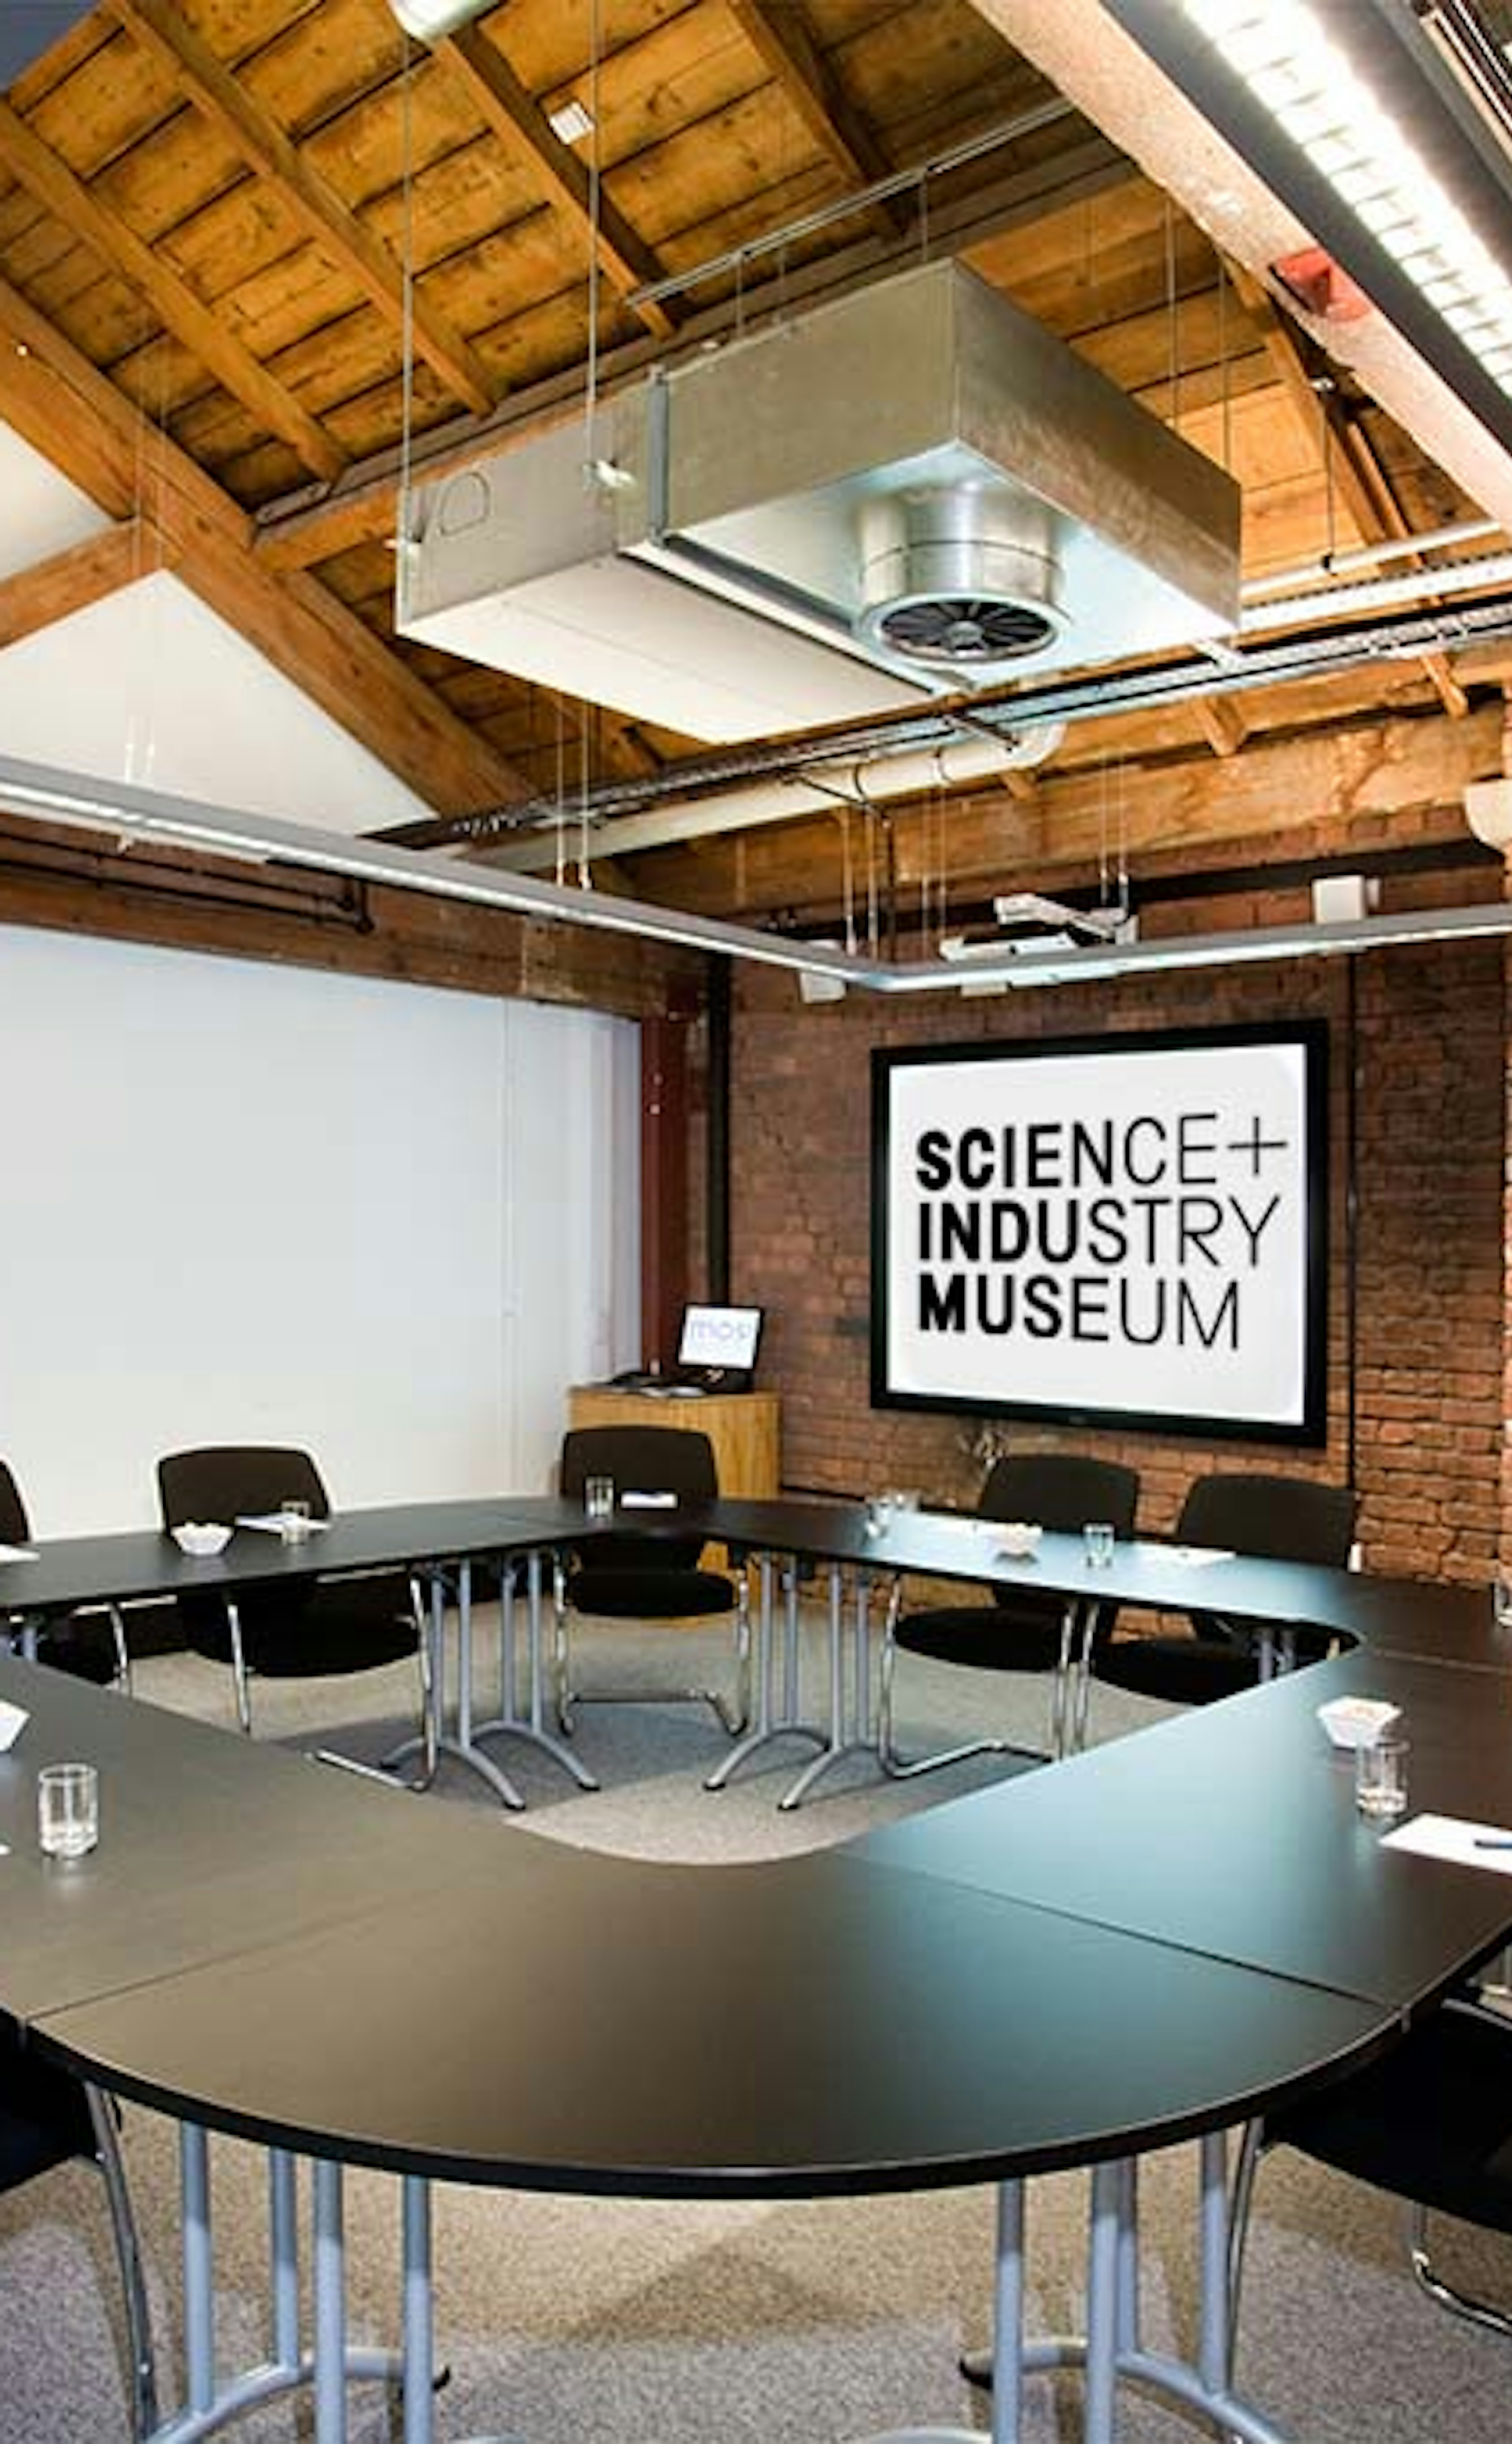 Workshop Venues - Science and Industry Museum